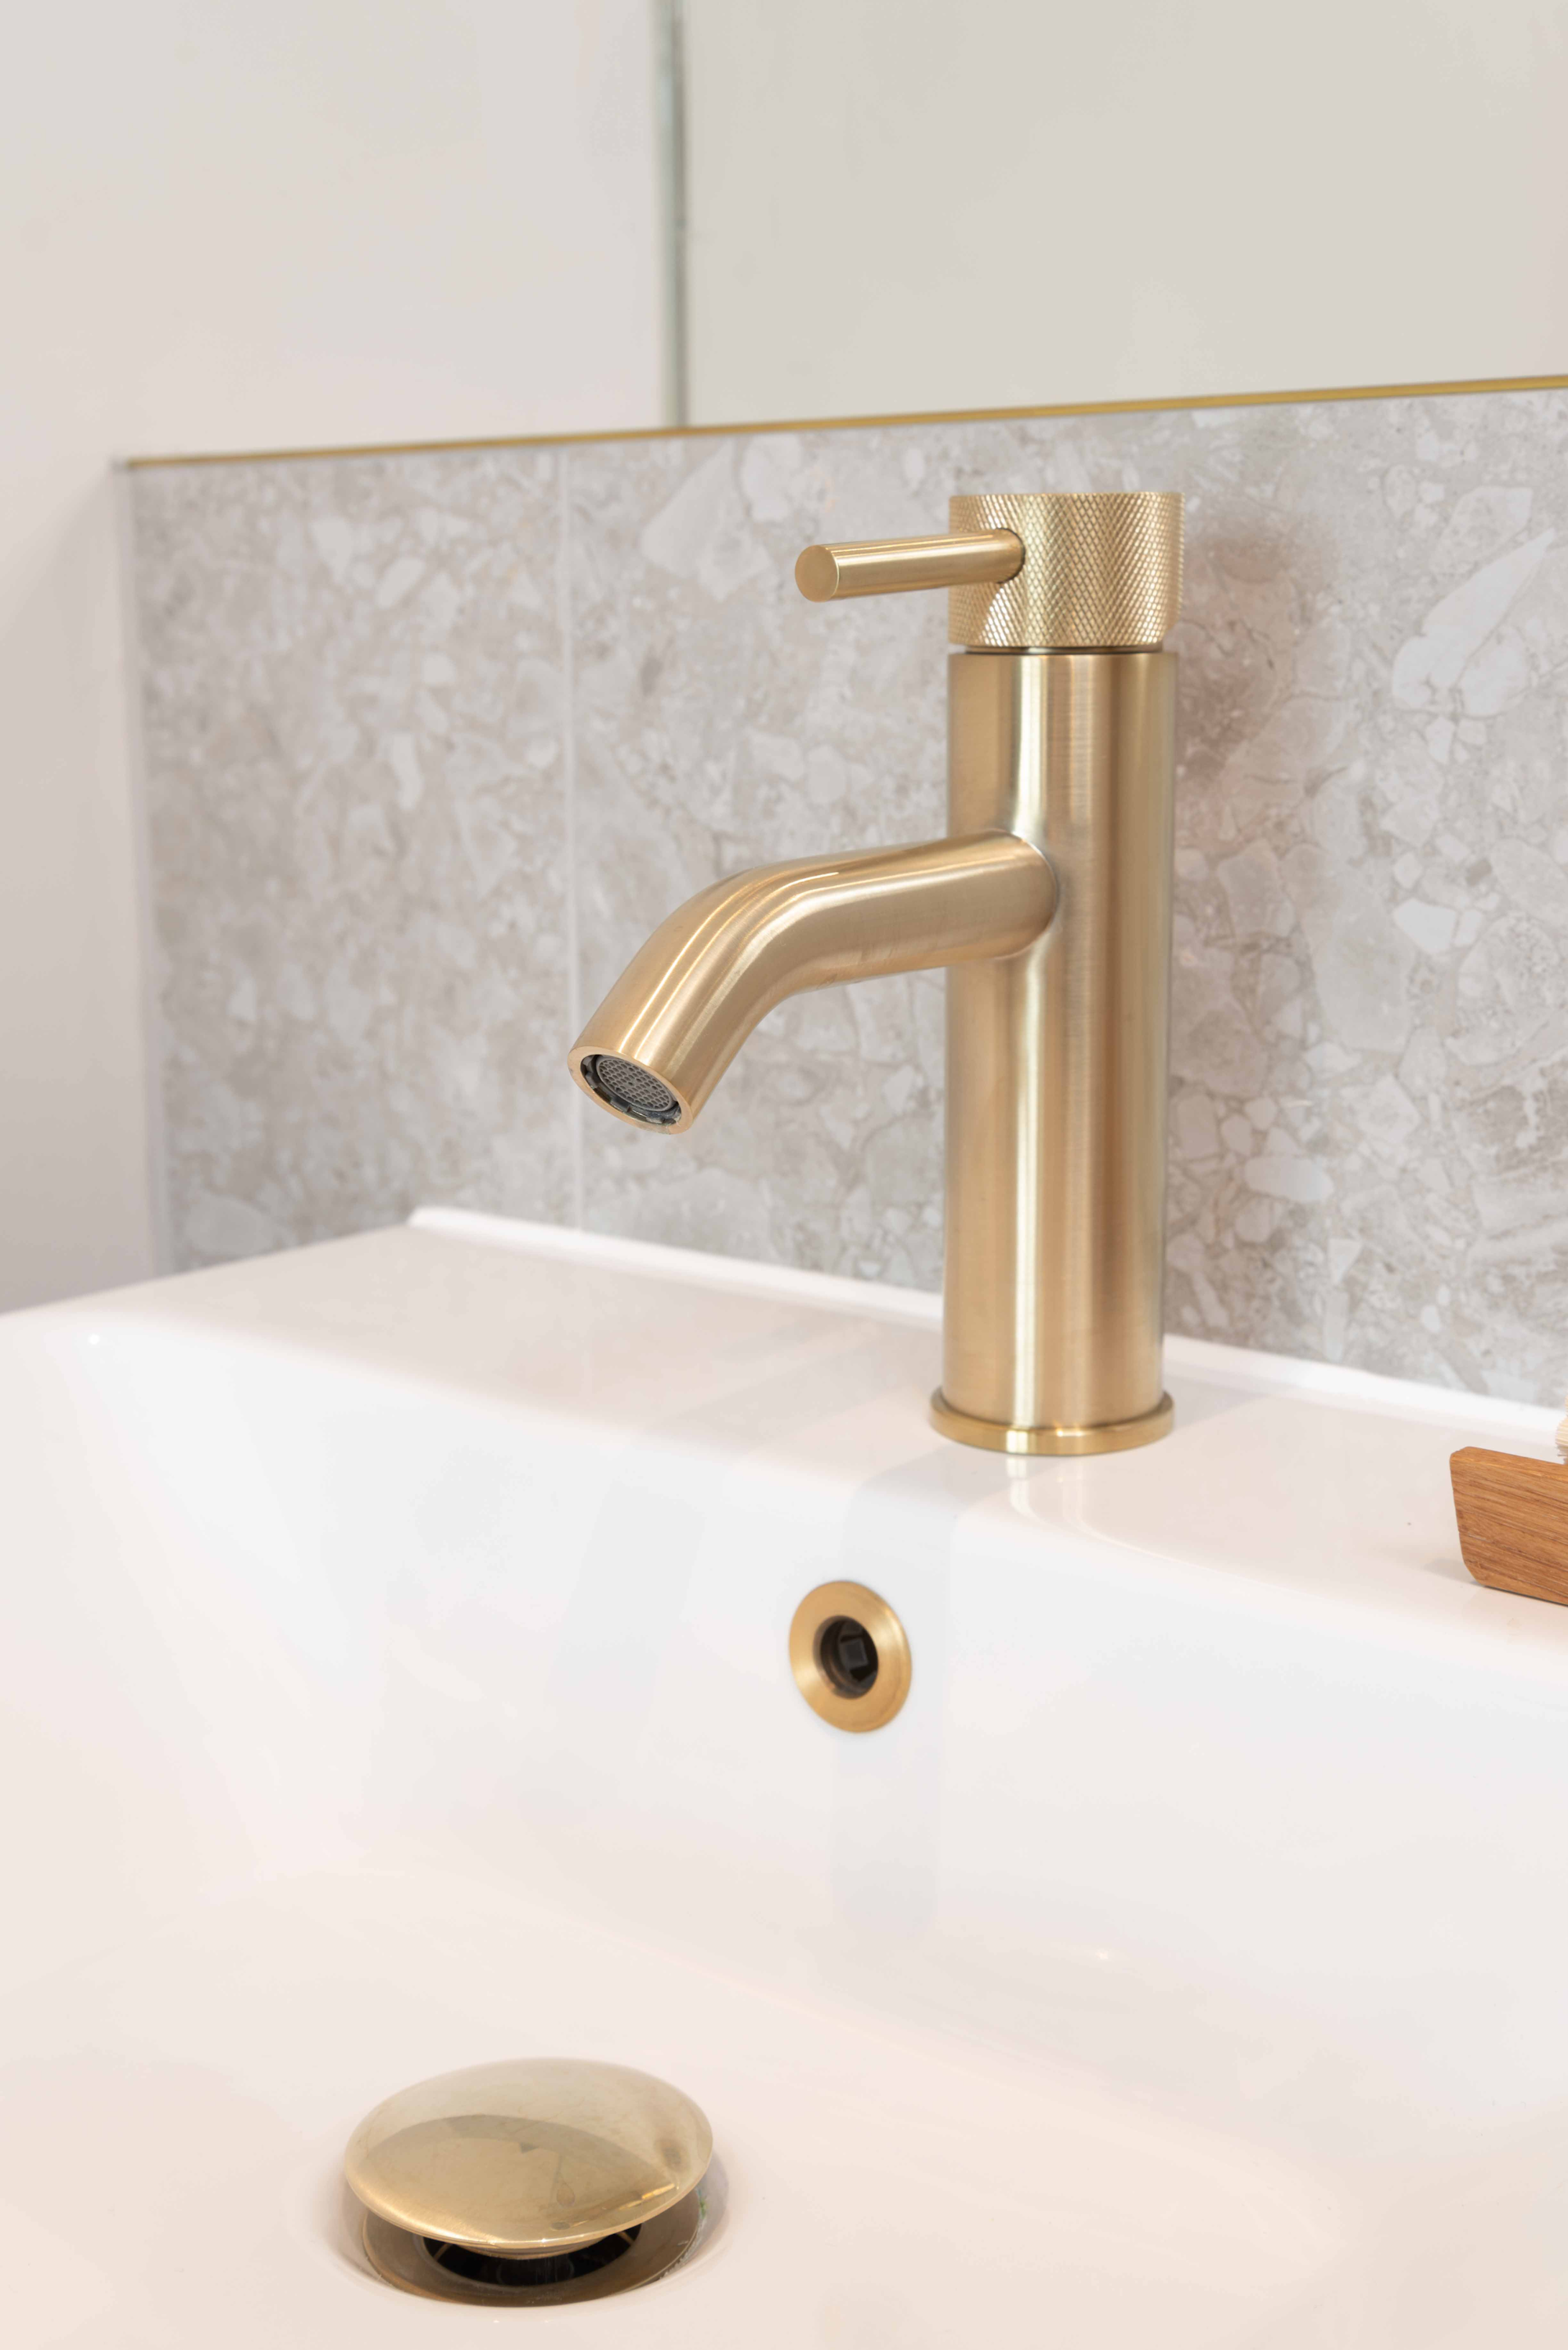 Saneux Cos basin mixer knurled brushed brass at Rubric Apartments, Whetstone